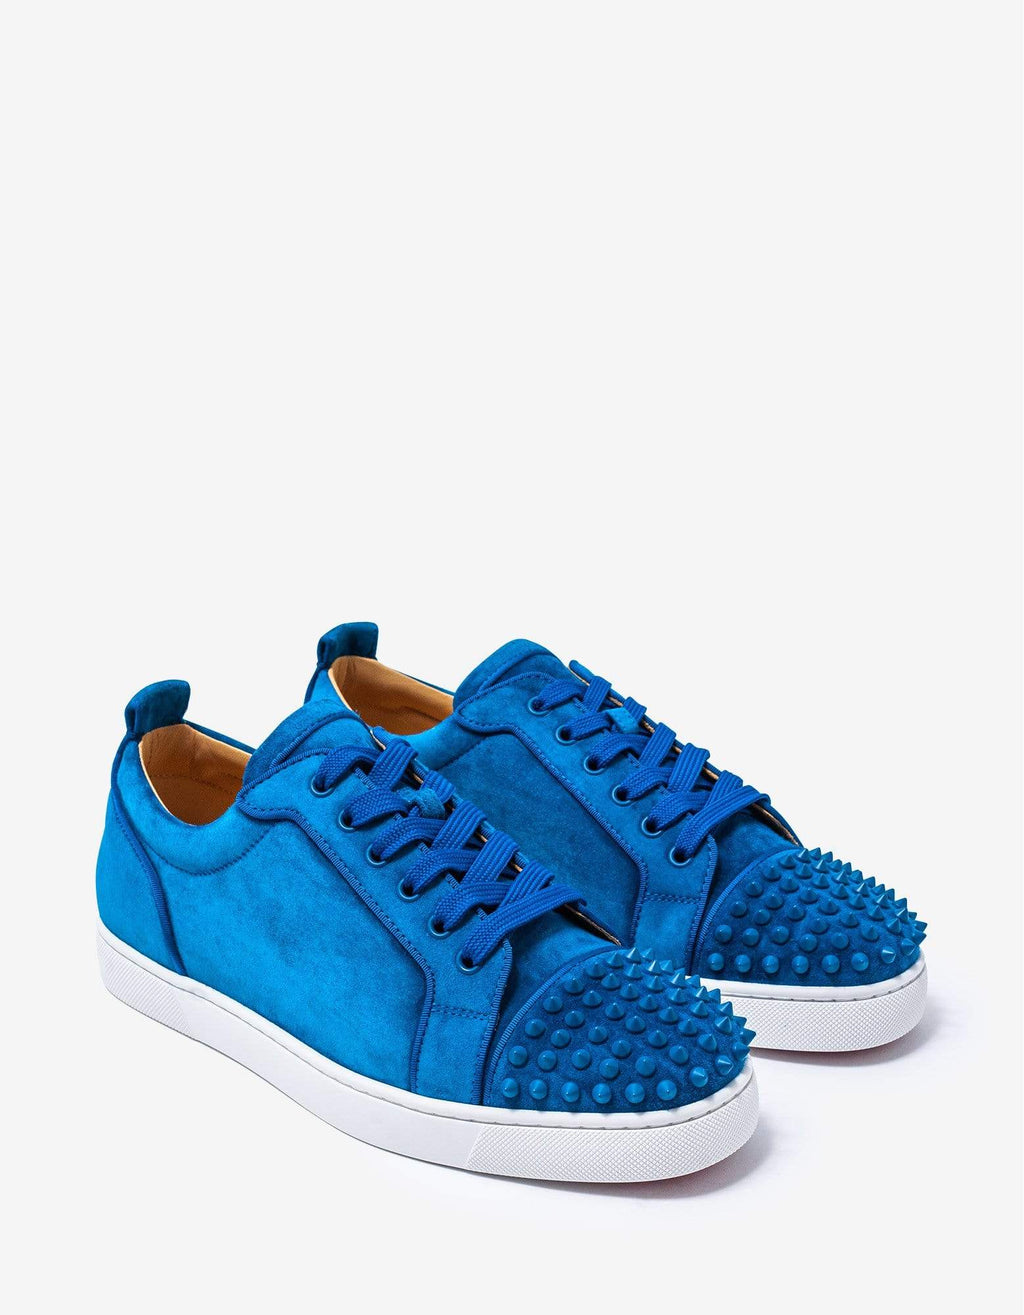 Christian Louboutin Christian Louboutin Louis Junior Spikes Orlato Blue & White Suede Trainers